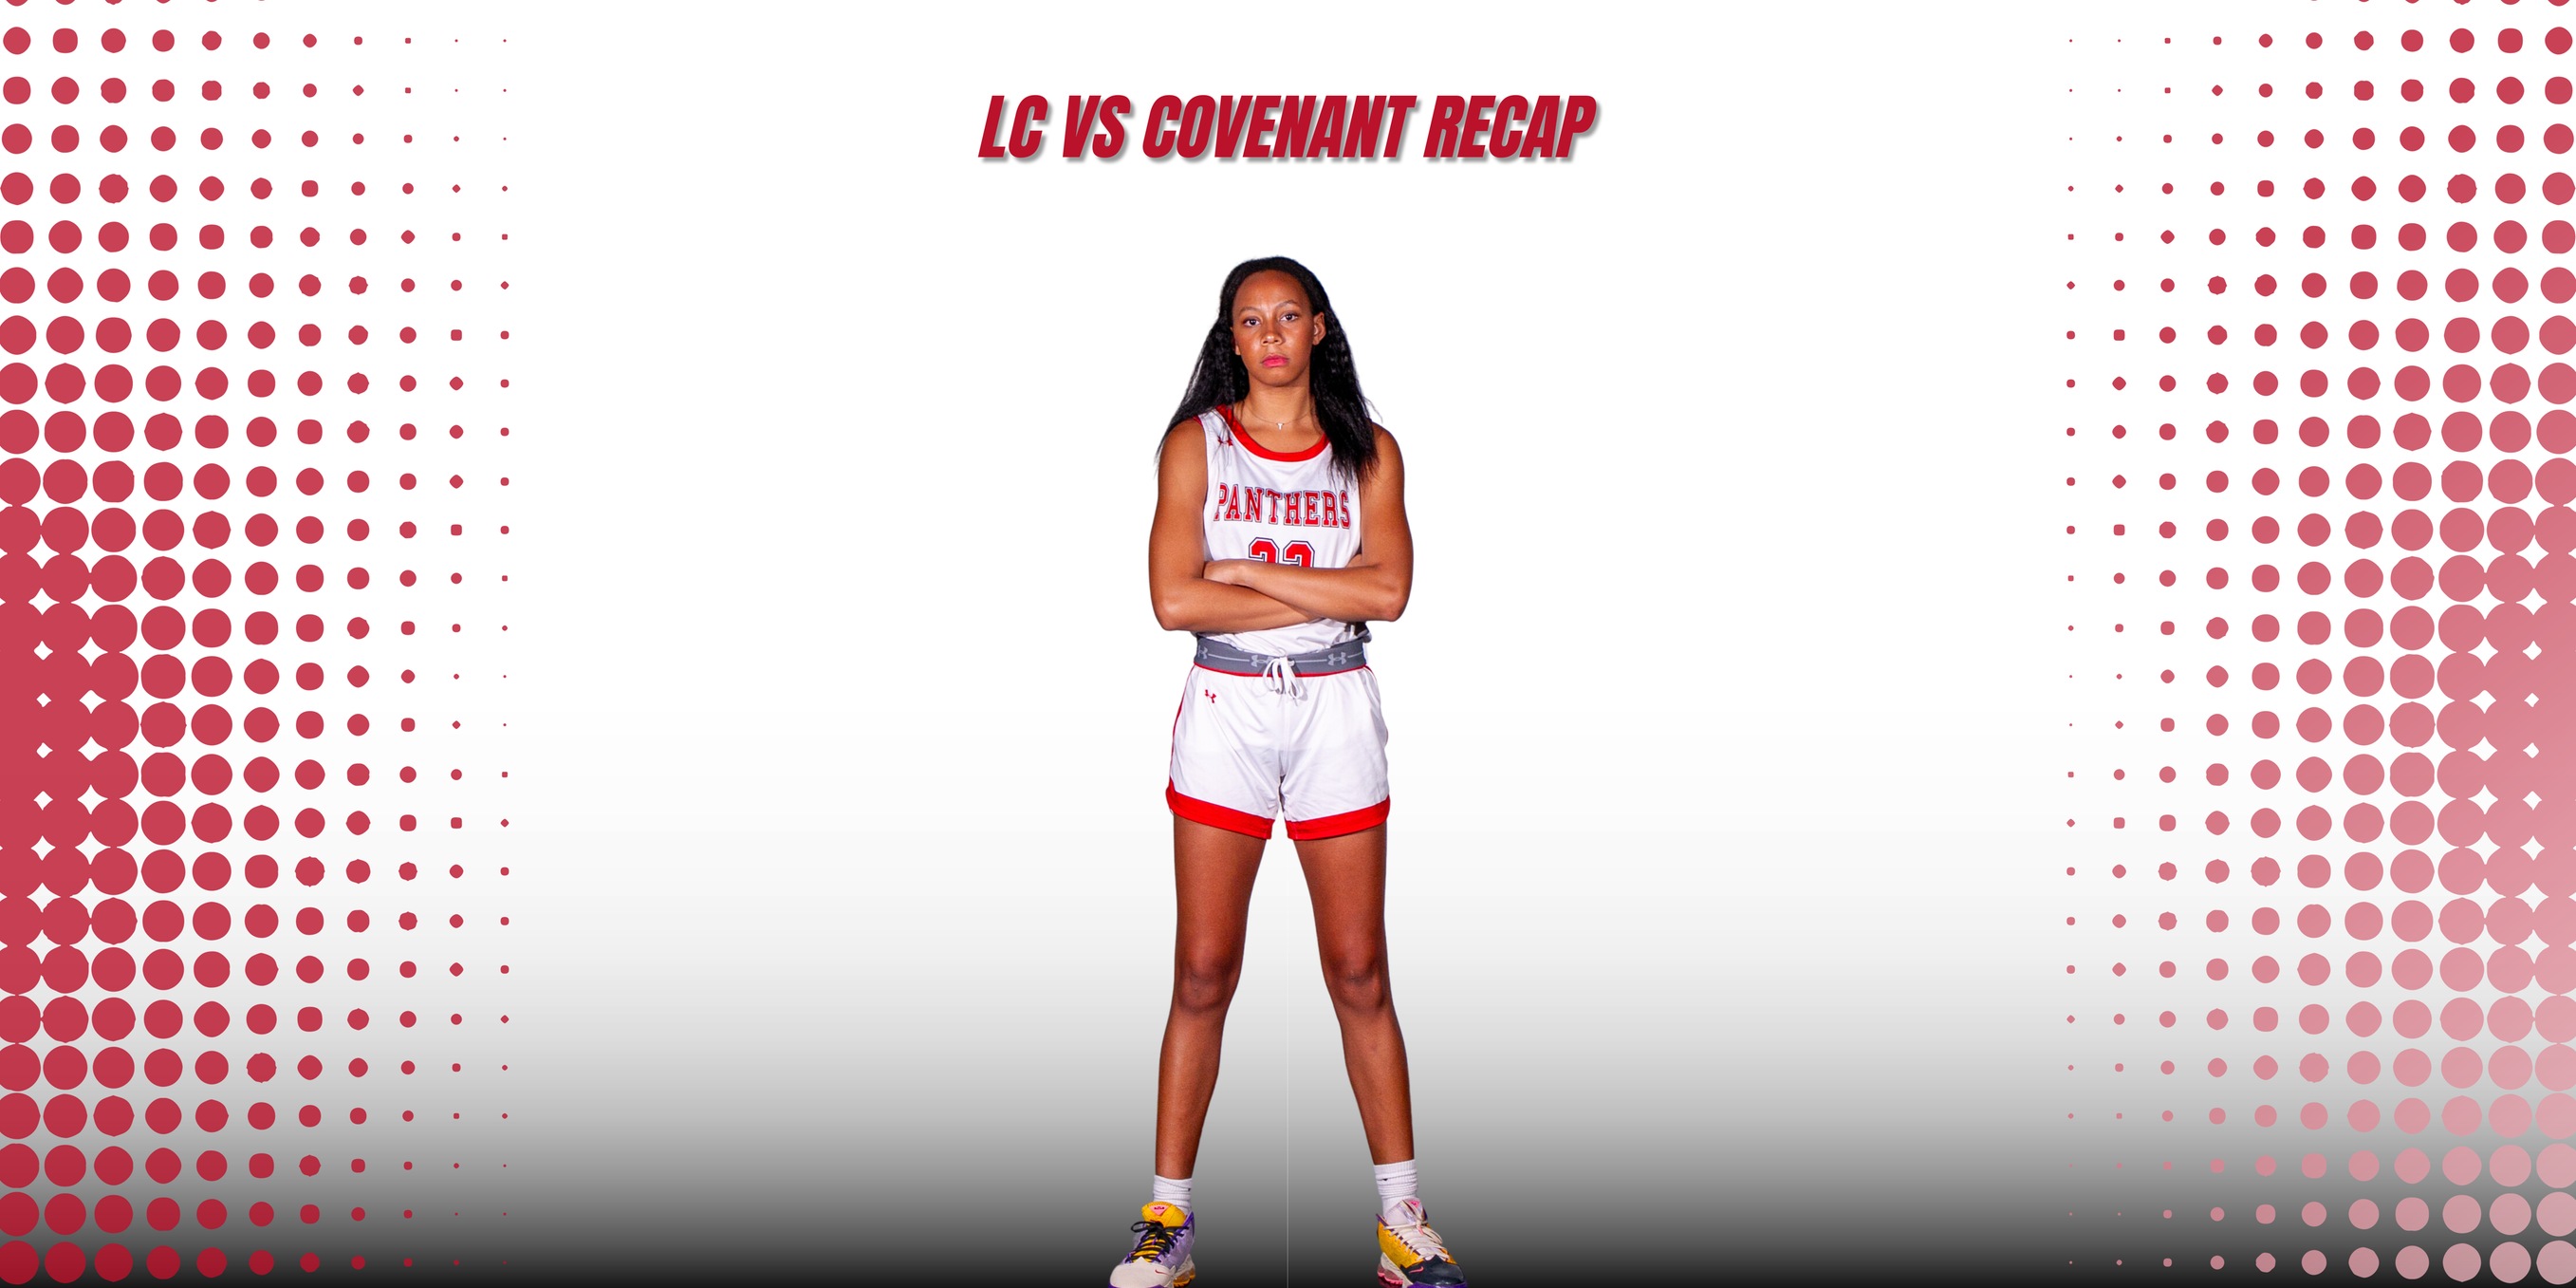 Women’s basketball improves to 3-0 in CCS after win over Covenant